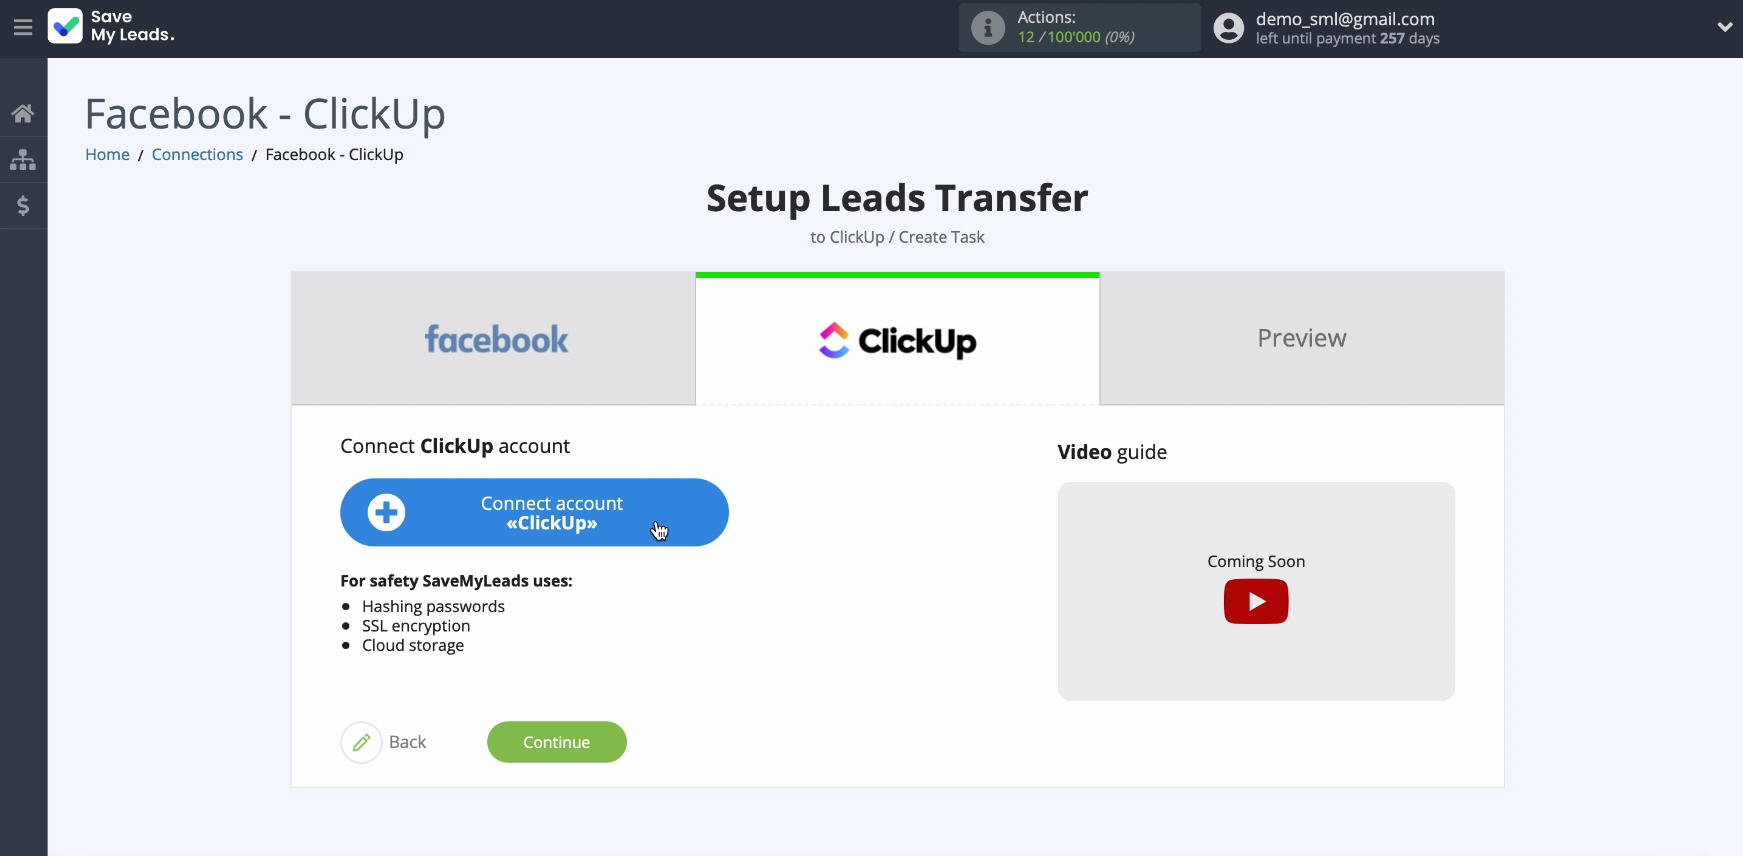 Facebook and ClickUp integration | Connect ClickUp to SaveMyLeads